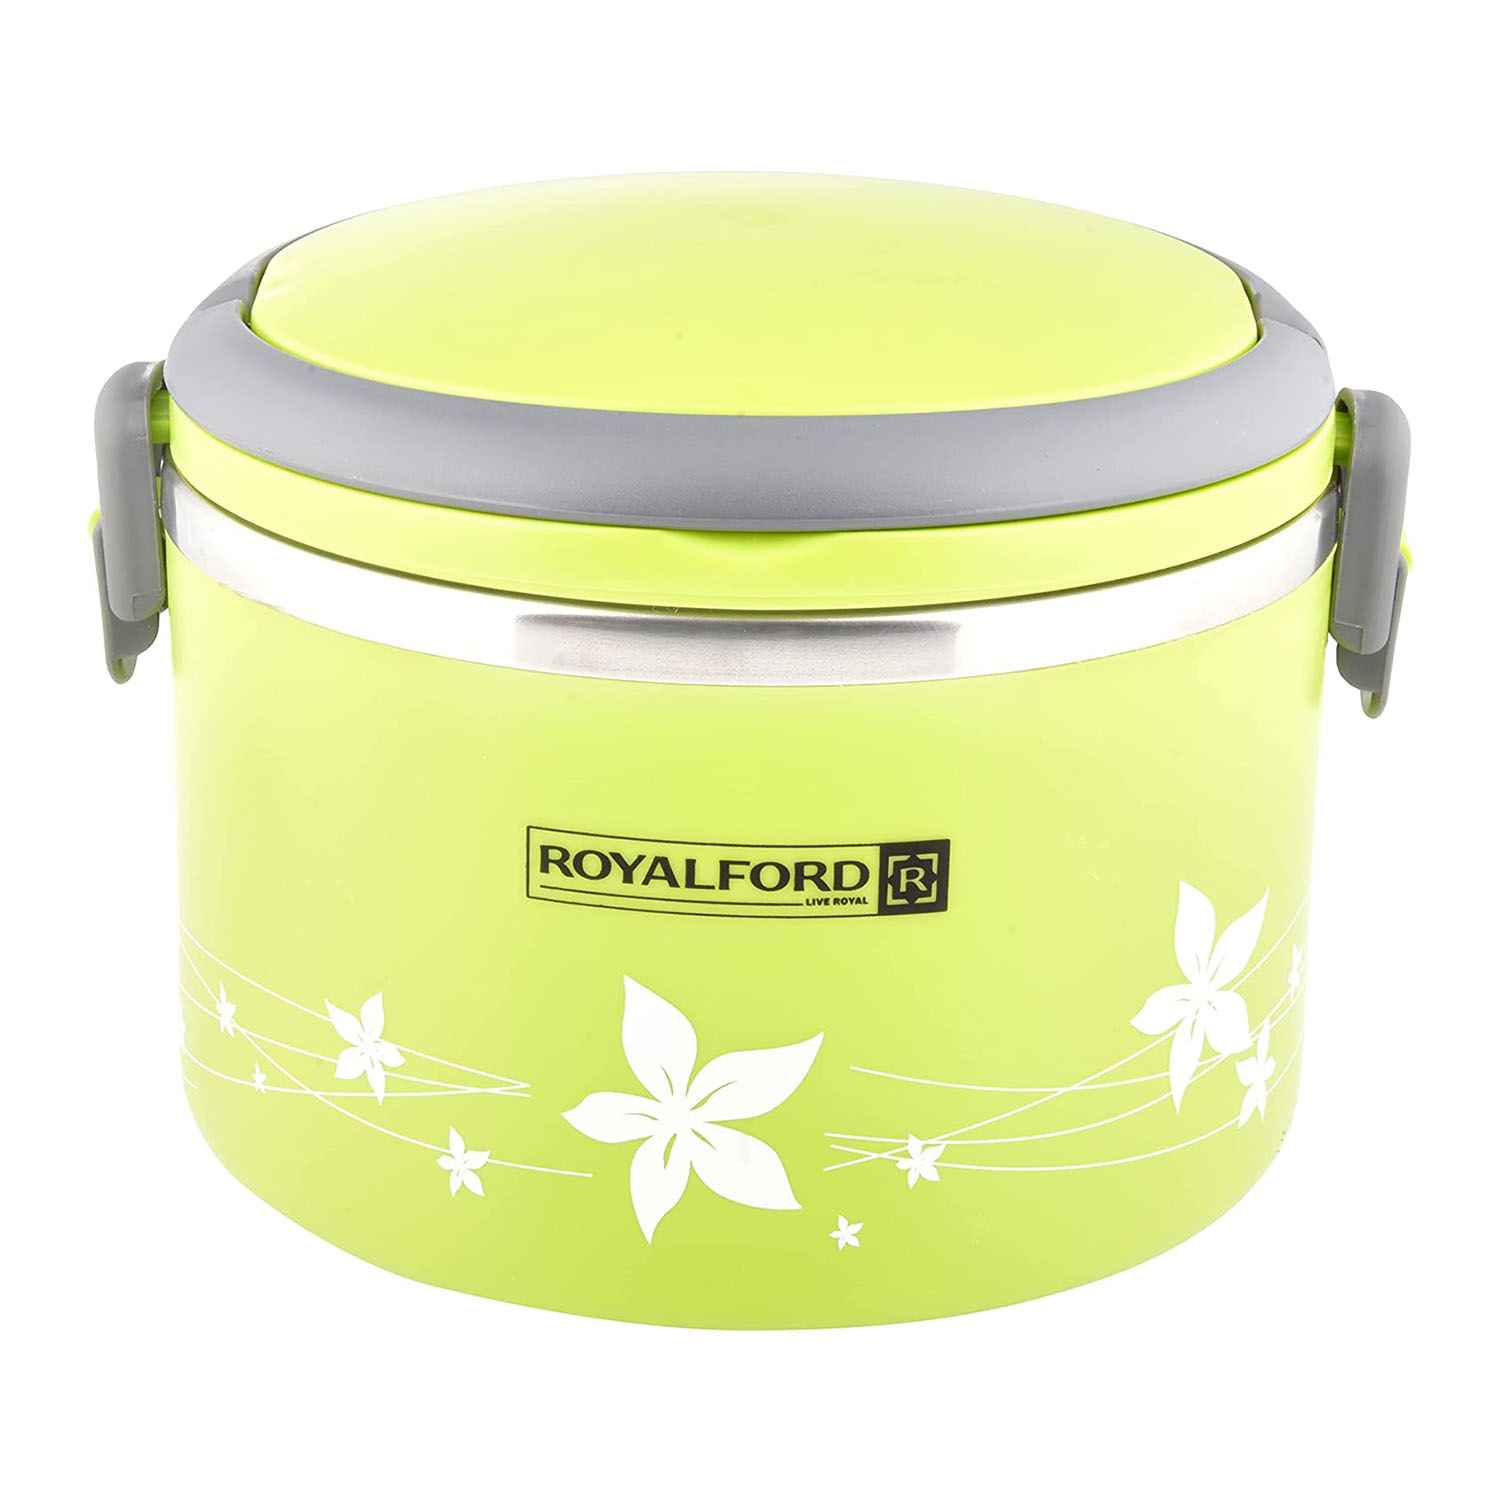 Royal ford  RF5650 Royalford 1800ml Lunch Box – Leak Proof & Airtight Lid Food Storage Container – High Quality Stainless Steel Inner, Durable, Non-toxic and Extended Fastening Lid Design – Portable and Dishwasher Safe